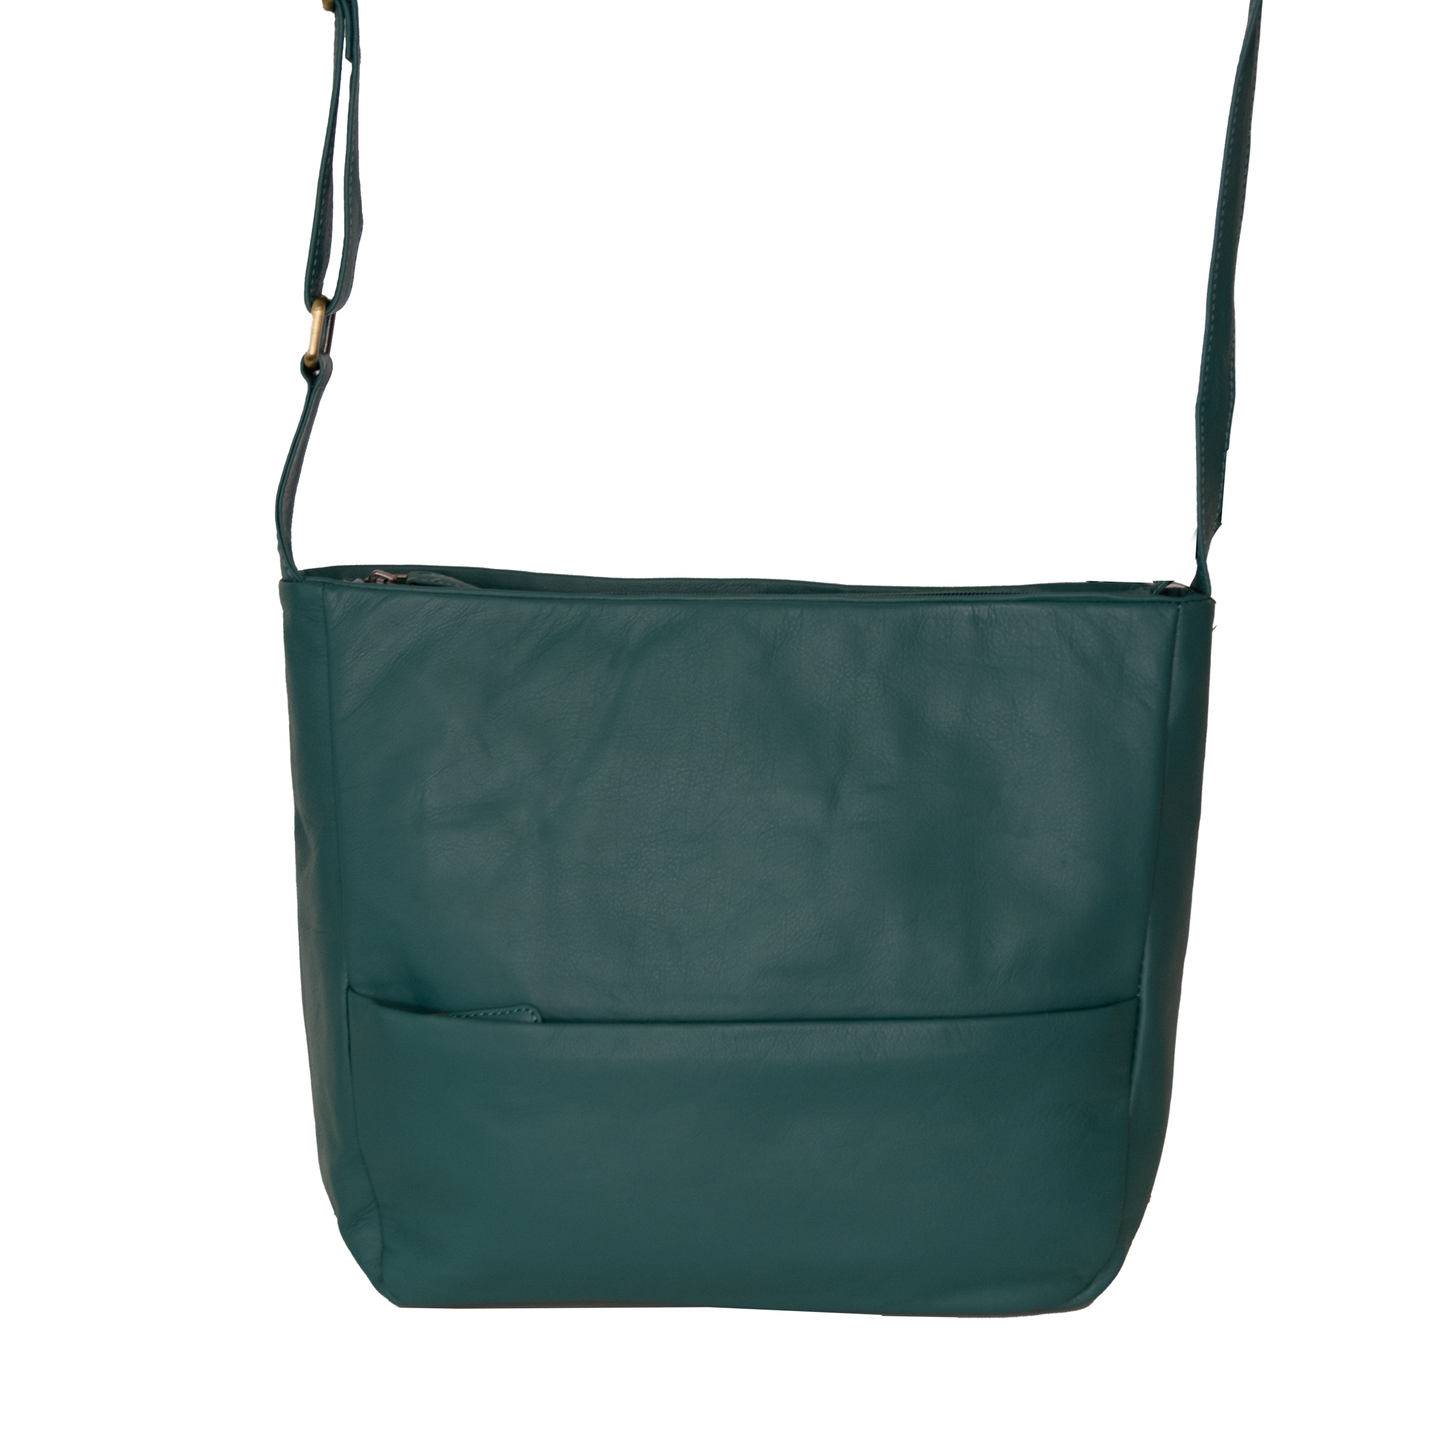 Mary - Large Slouchy Cross Body Bag